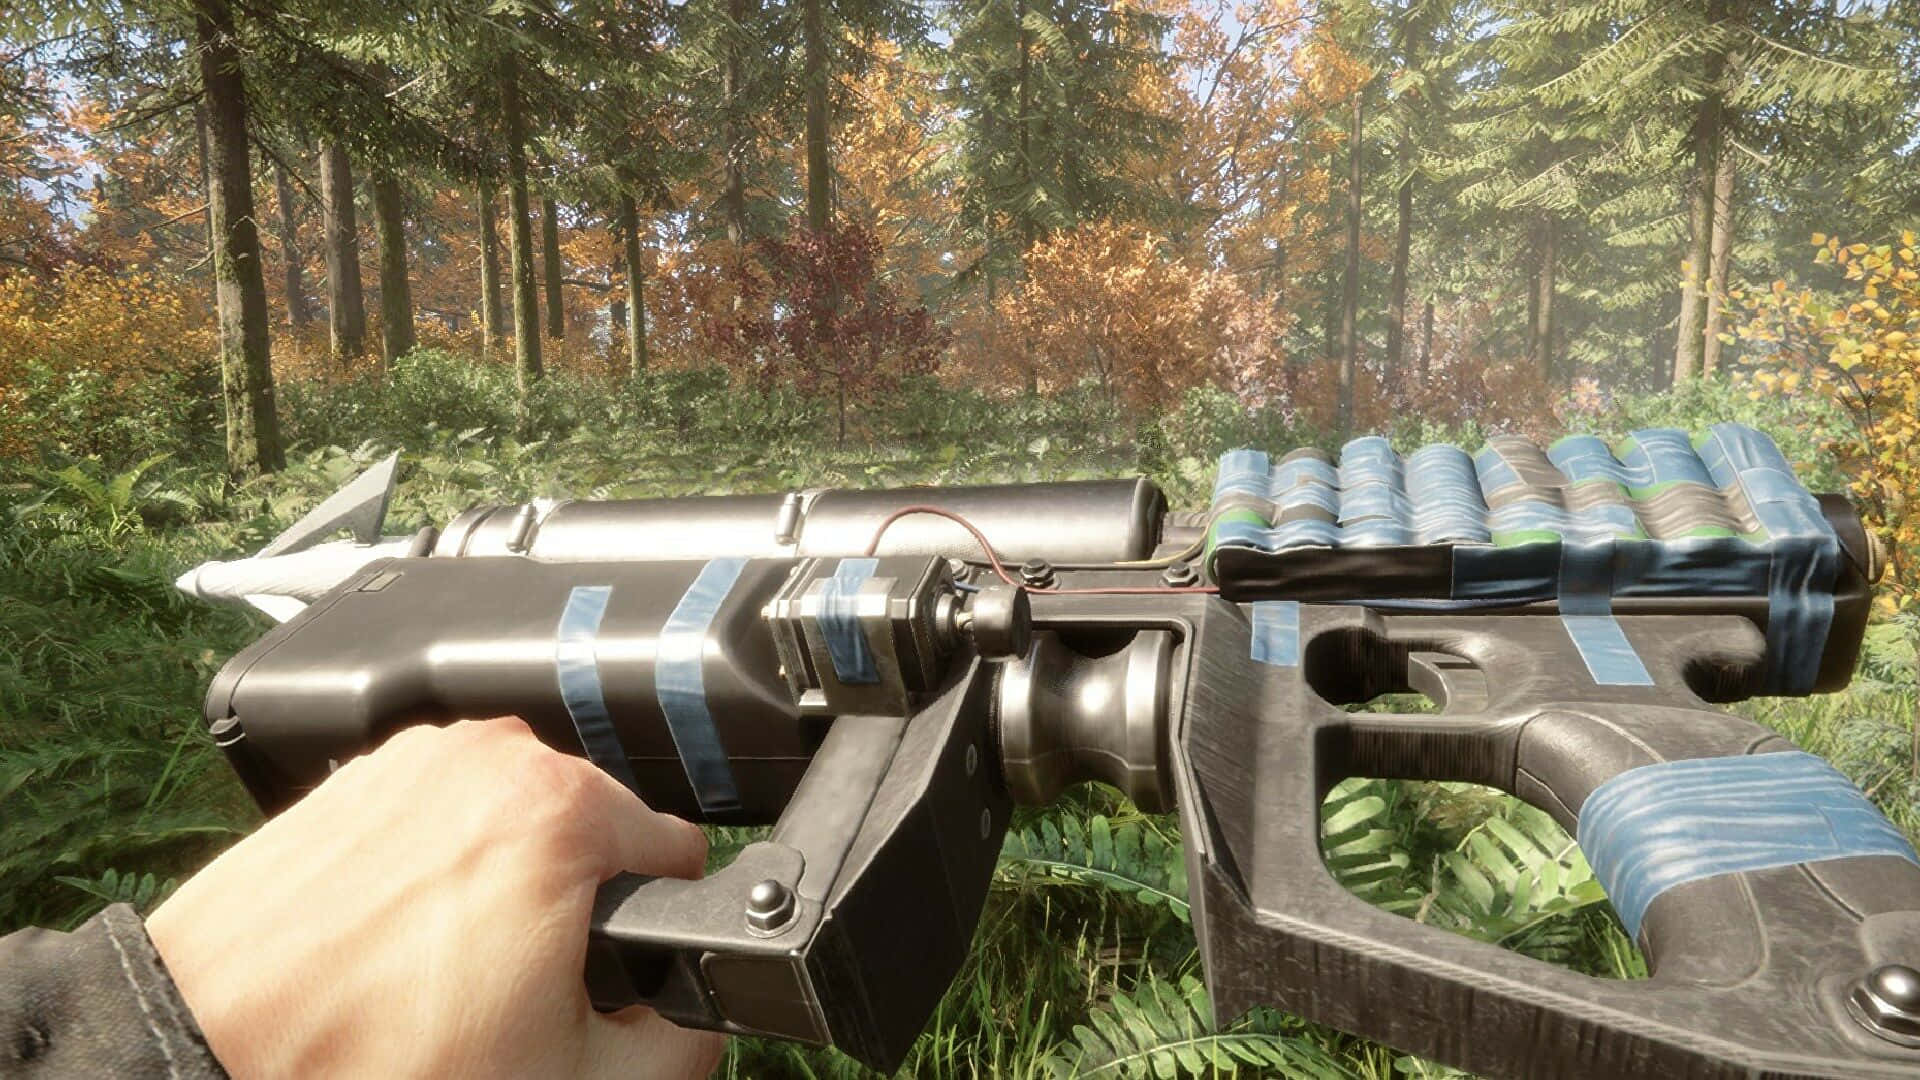 A Hand Holding A Gun In The Woods